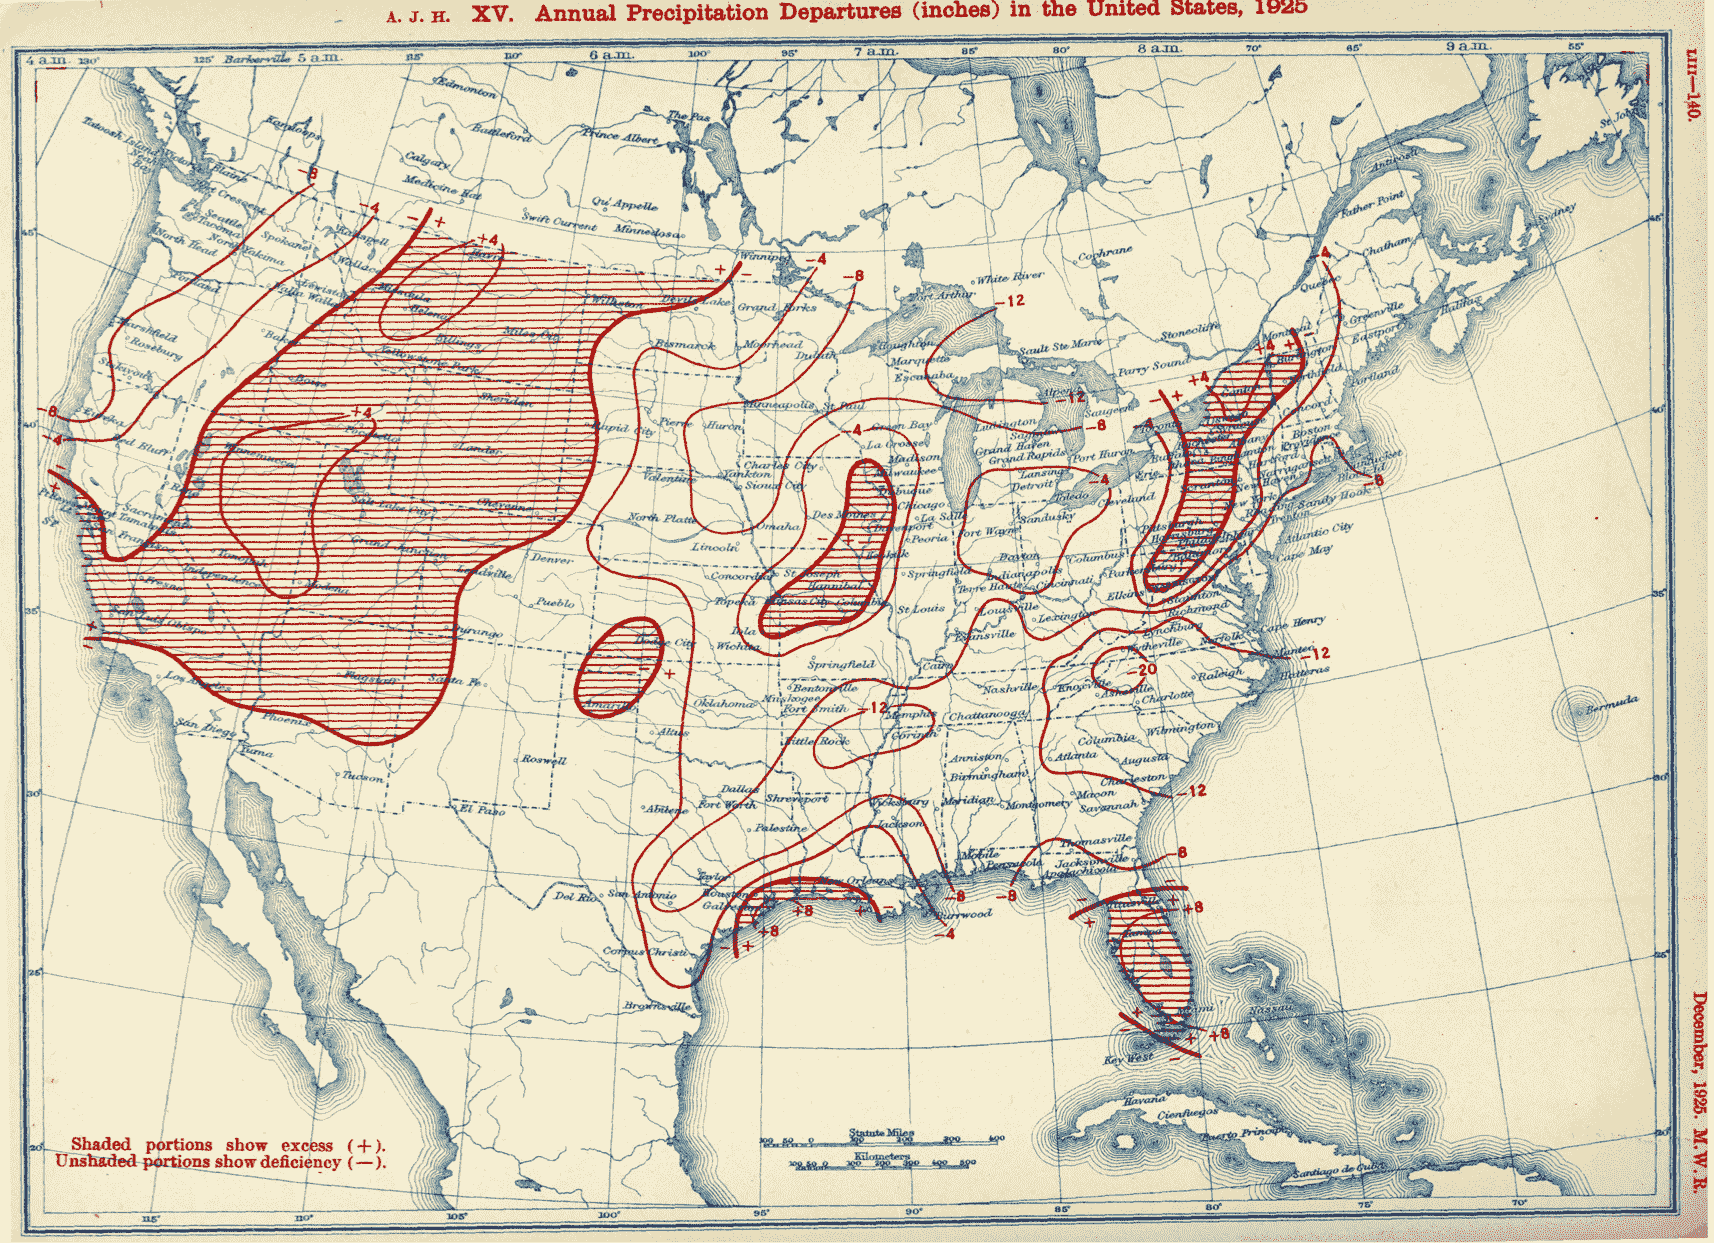 MWR map of departure from normal precipitation